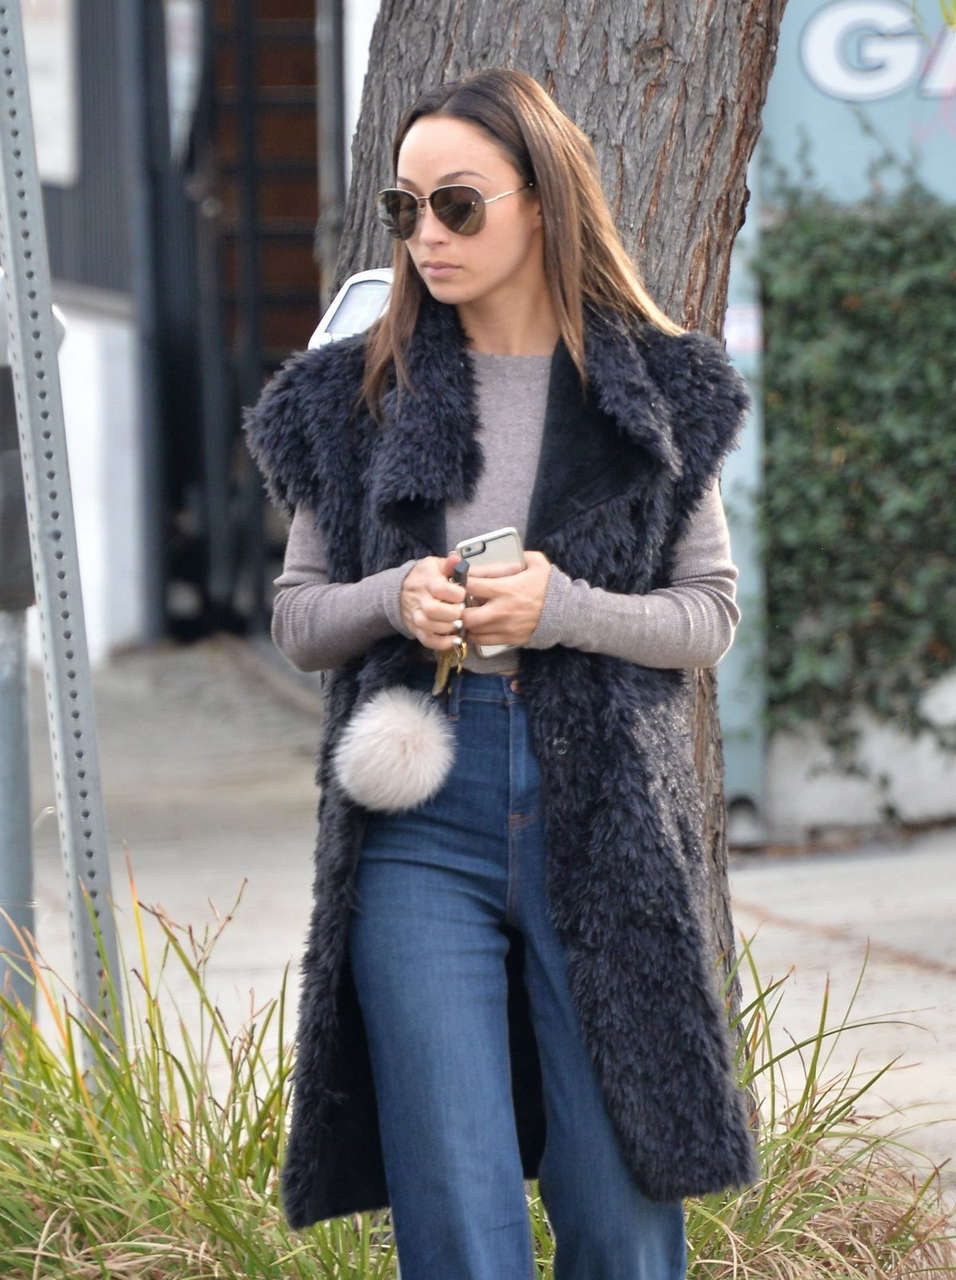 Cara Santana Out About Los Angeles